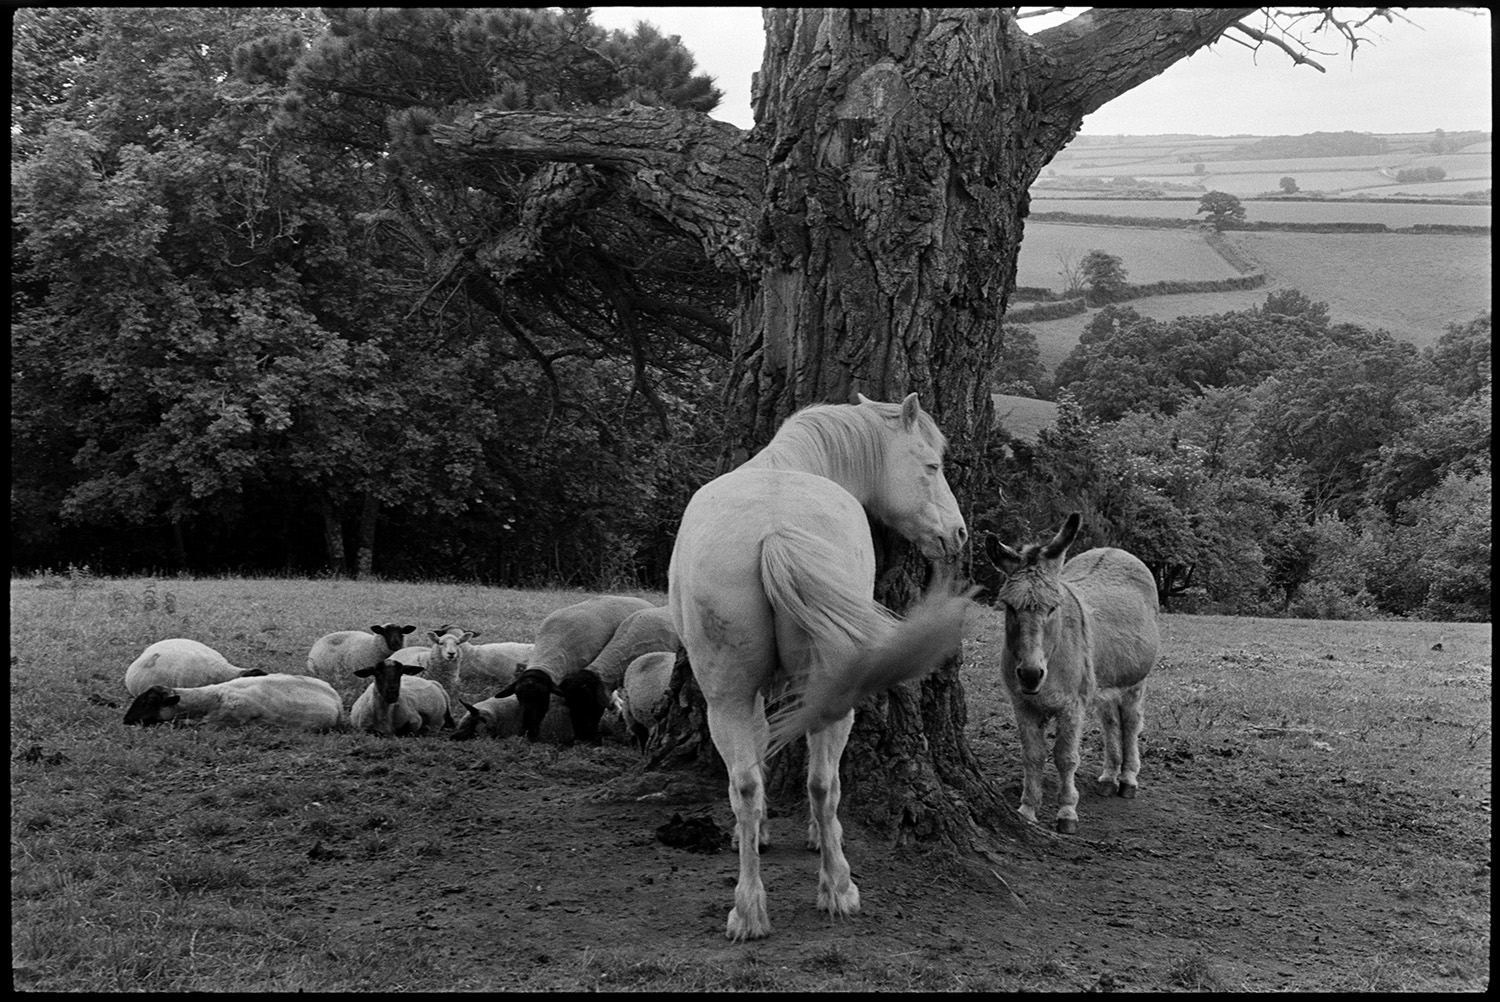 Horse, donkey and sheep under tree. 
[A horse, a donkey and a small flock of sheep gathered under a Monterey Pine tree in a field at Halsdon, Dolton.]